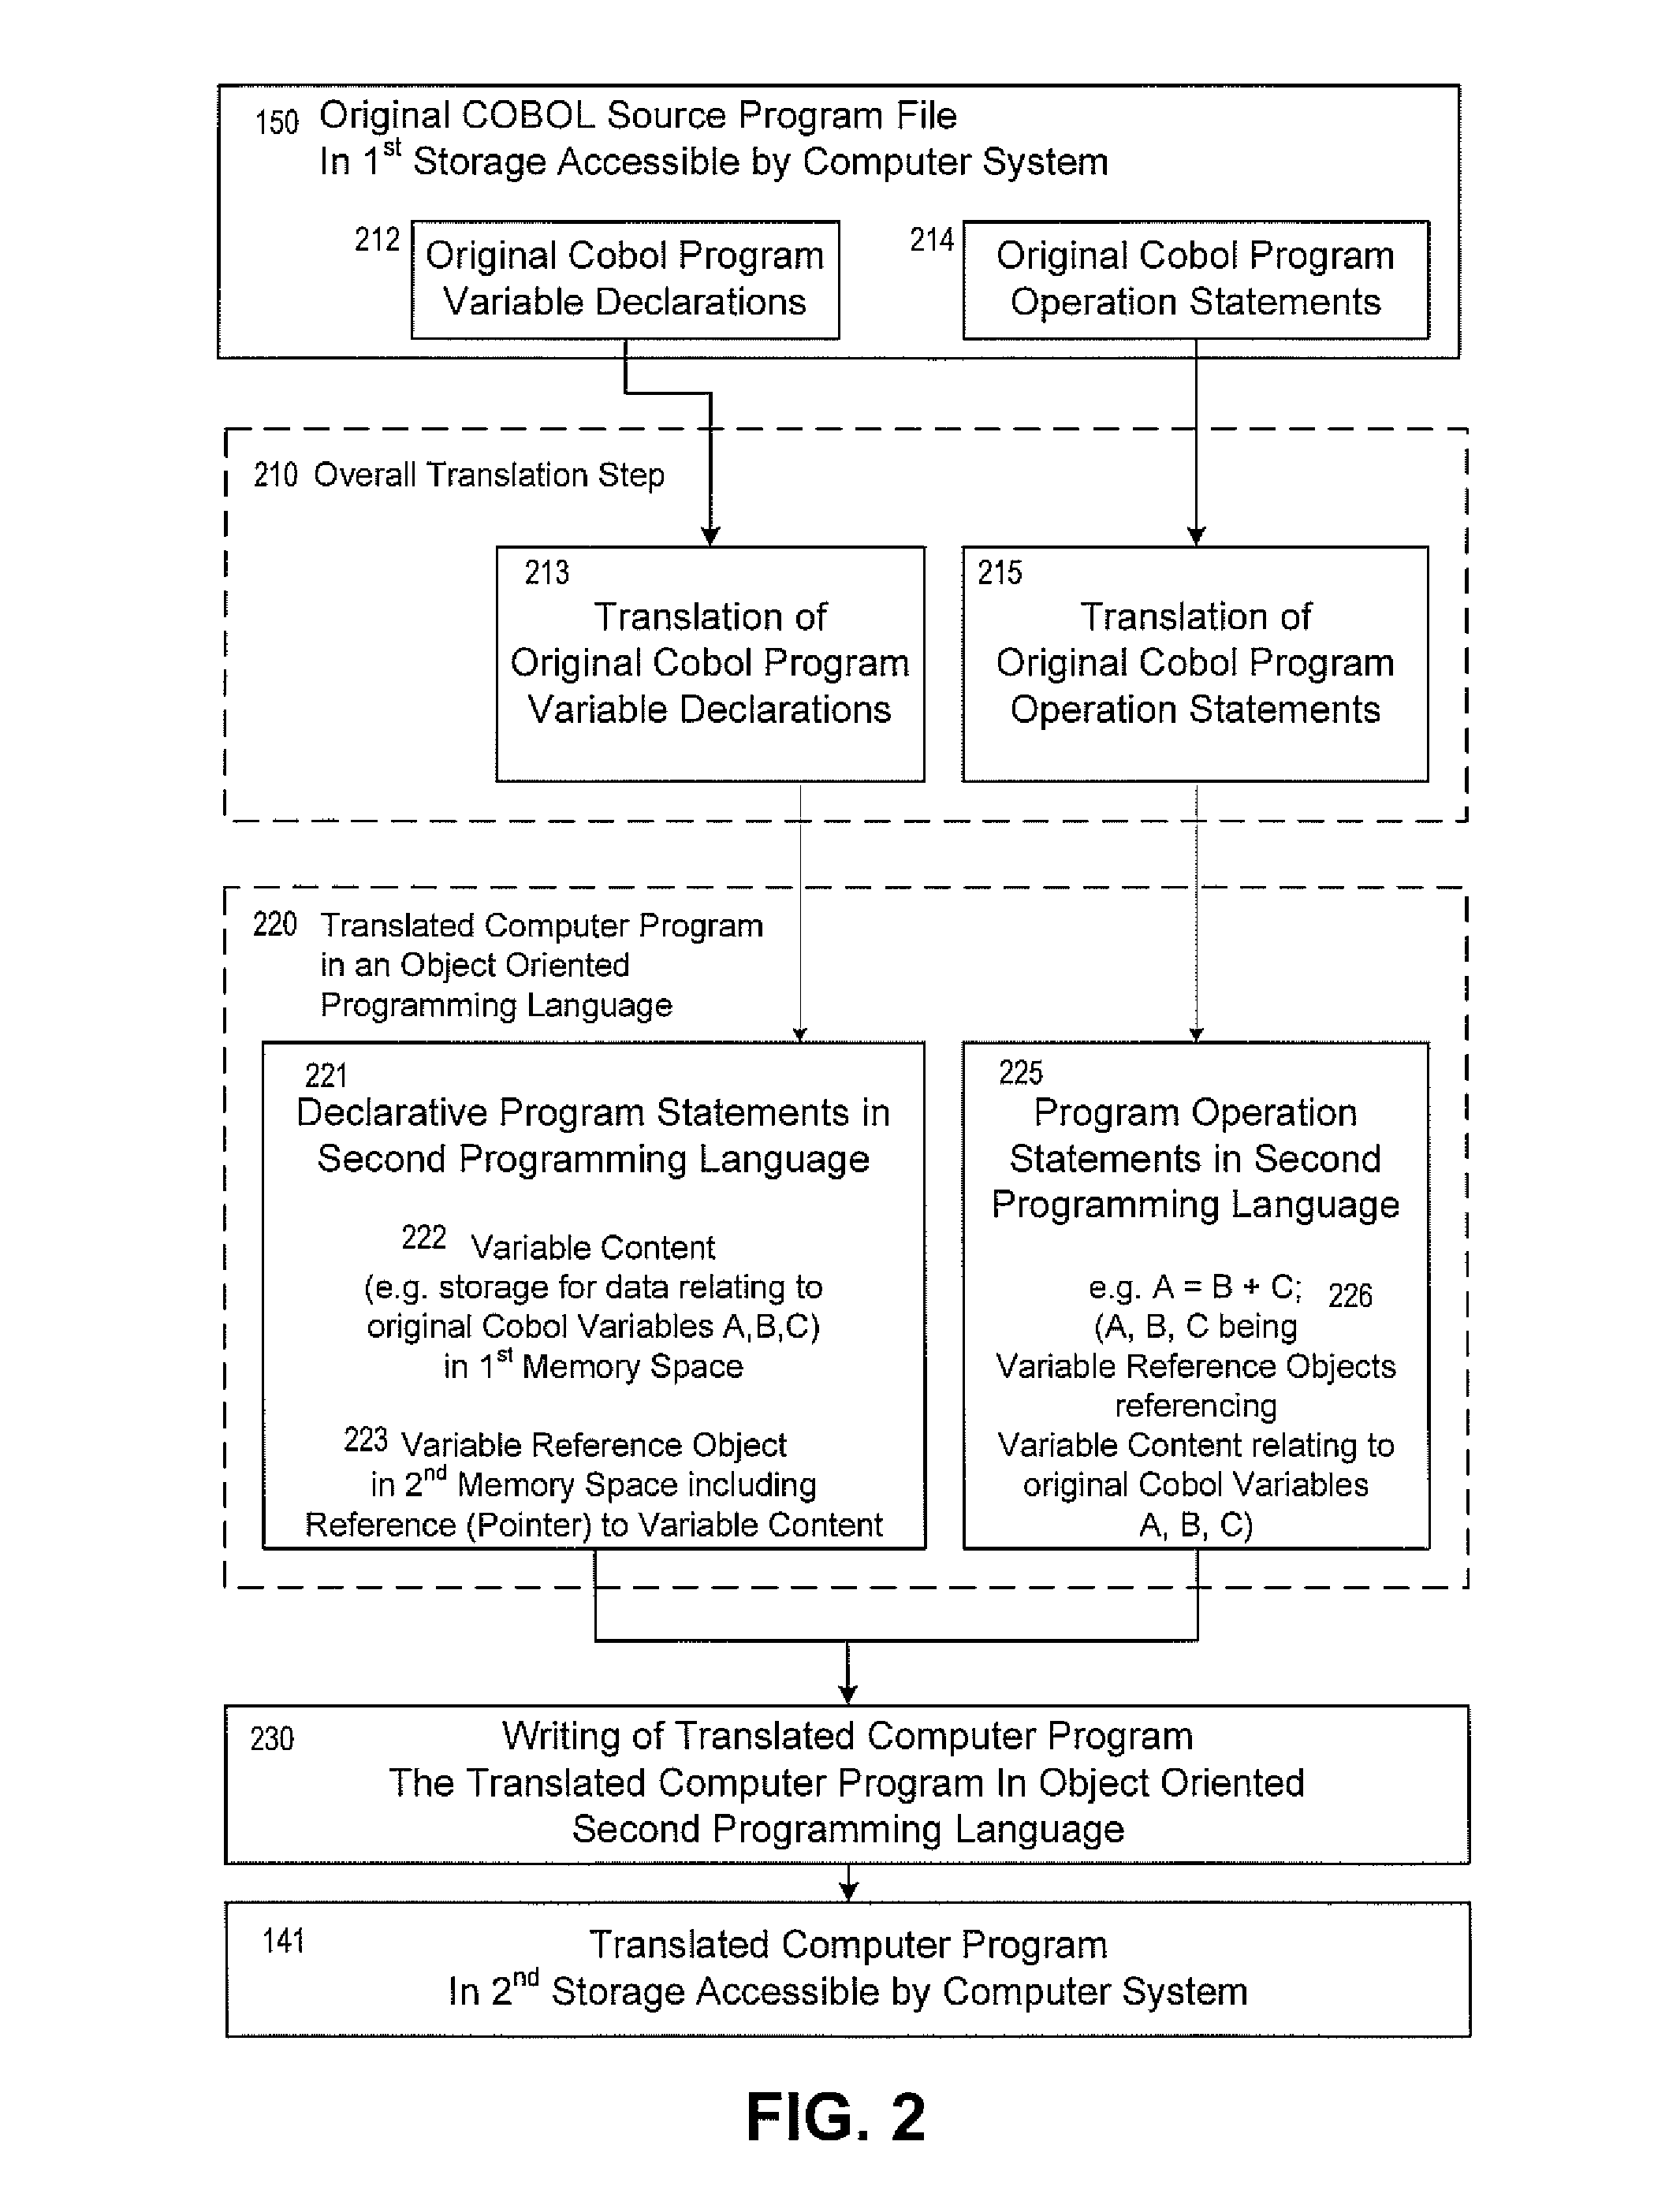 Method for translating a cobol source program into readable and maintainable program code in an object oriented second programming language